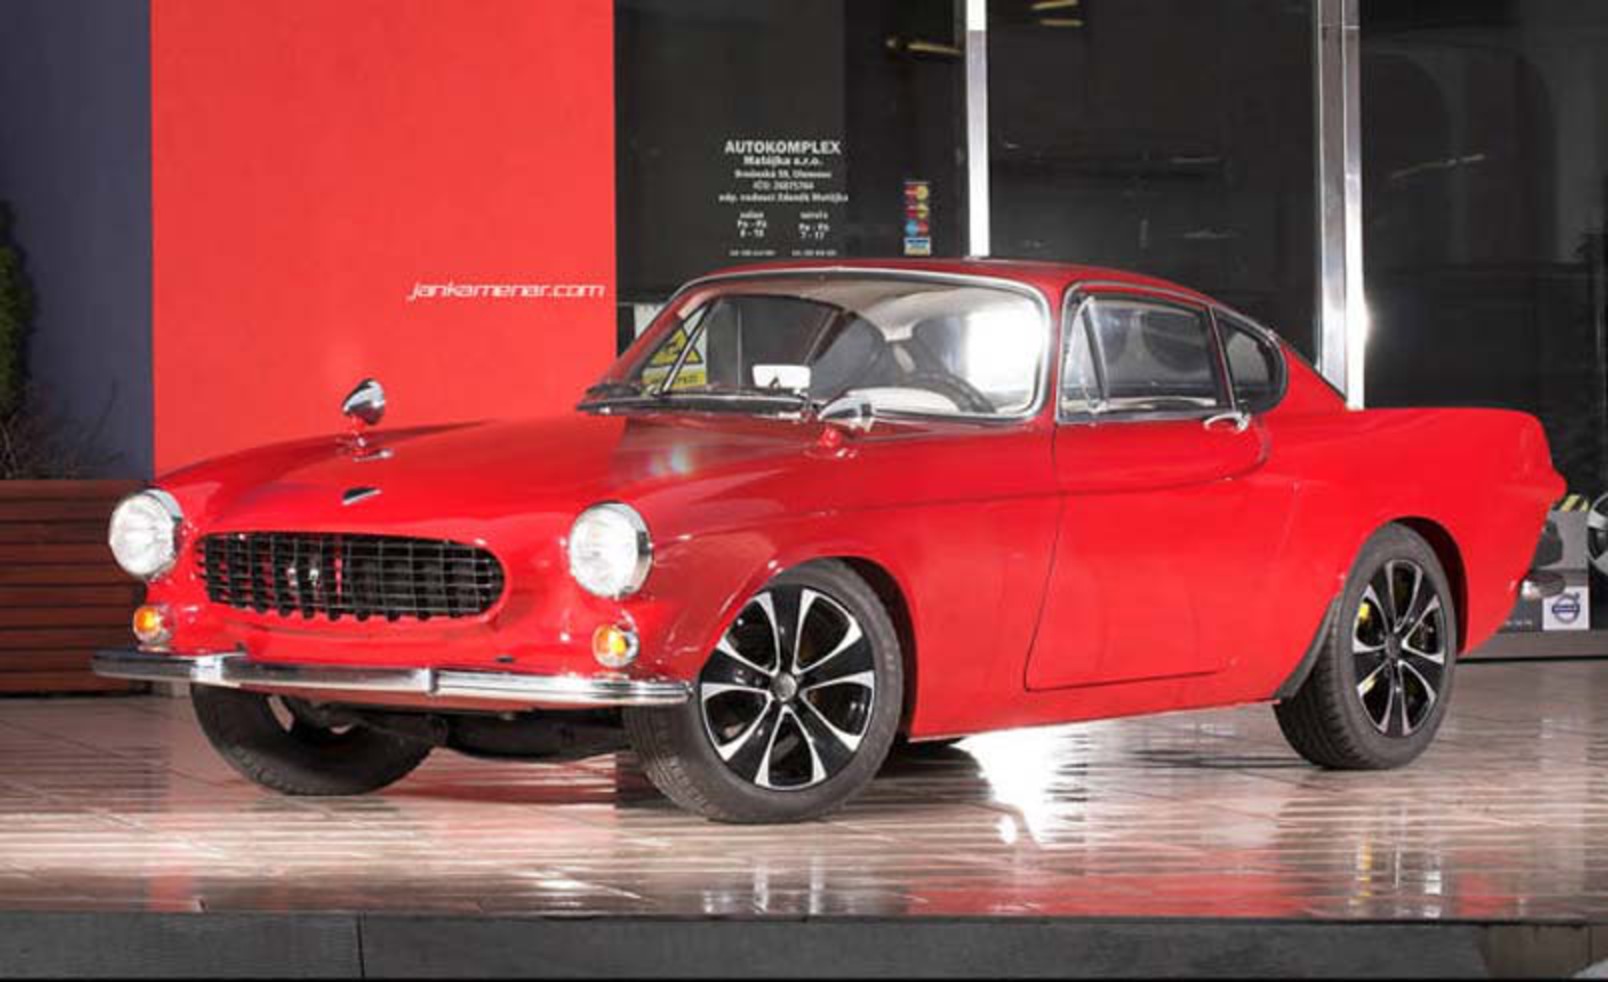 On this page we present you the most successful photo gallery of Volvo 1800S